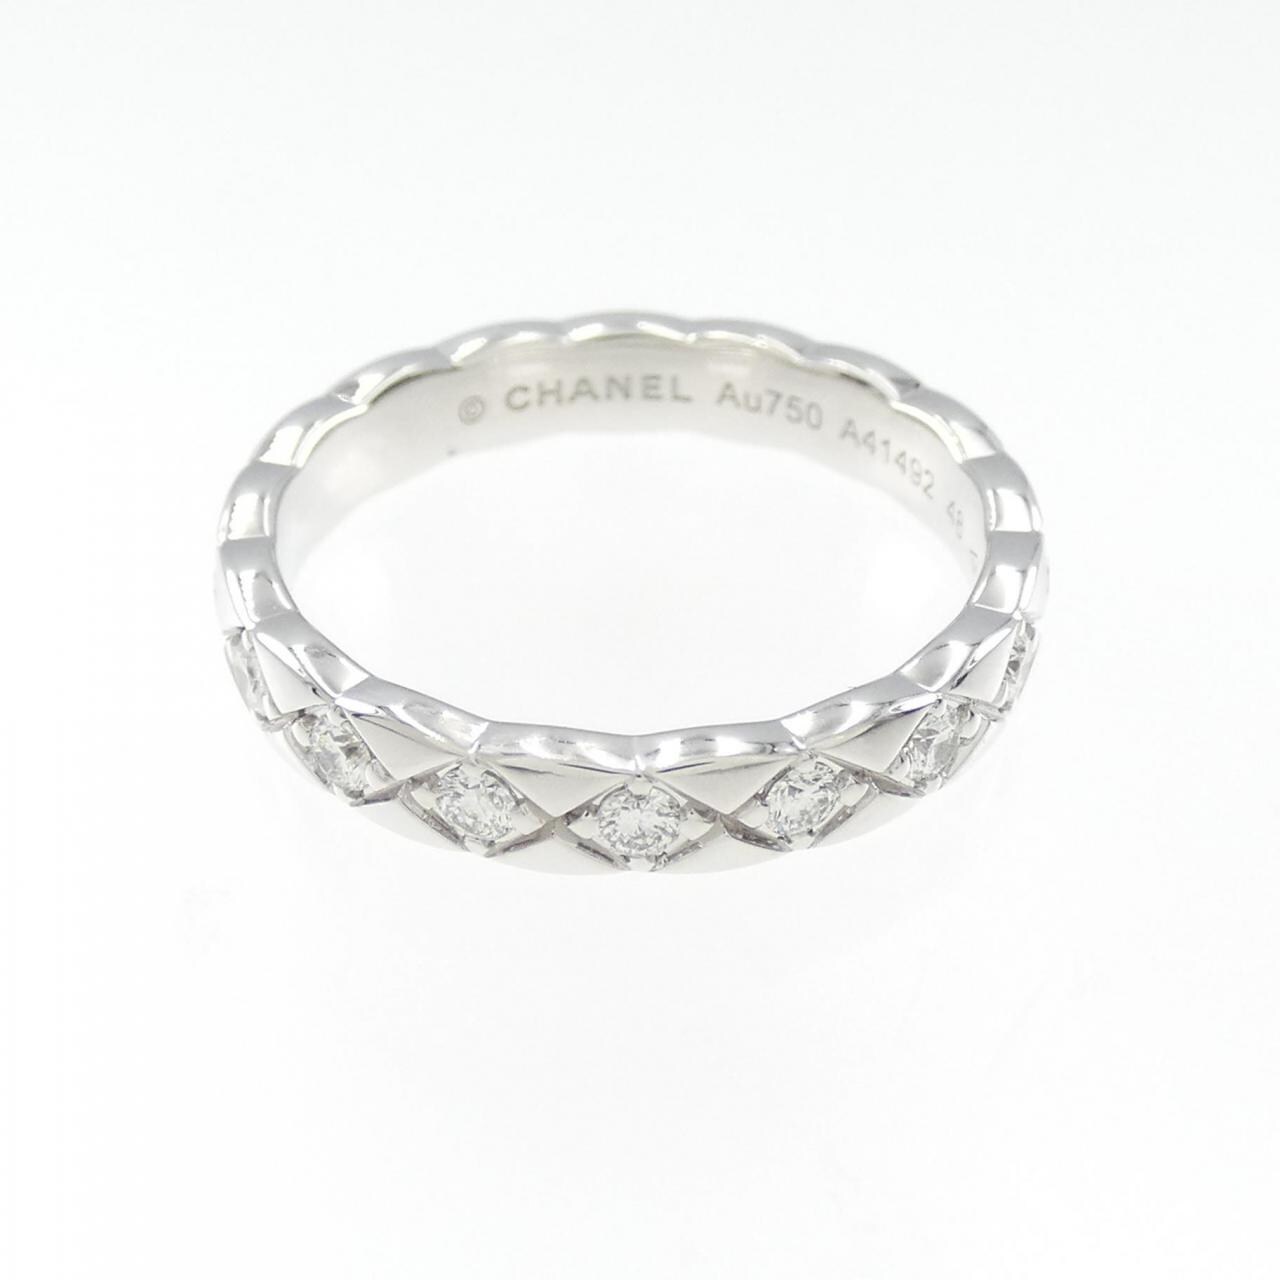 CHANEL Small White Gold and Diamond Coco Crush Ring